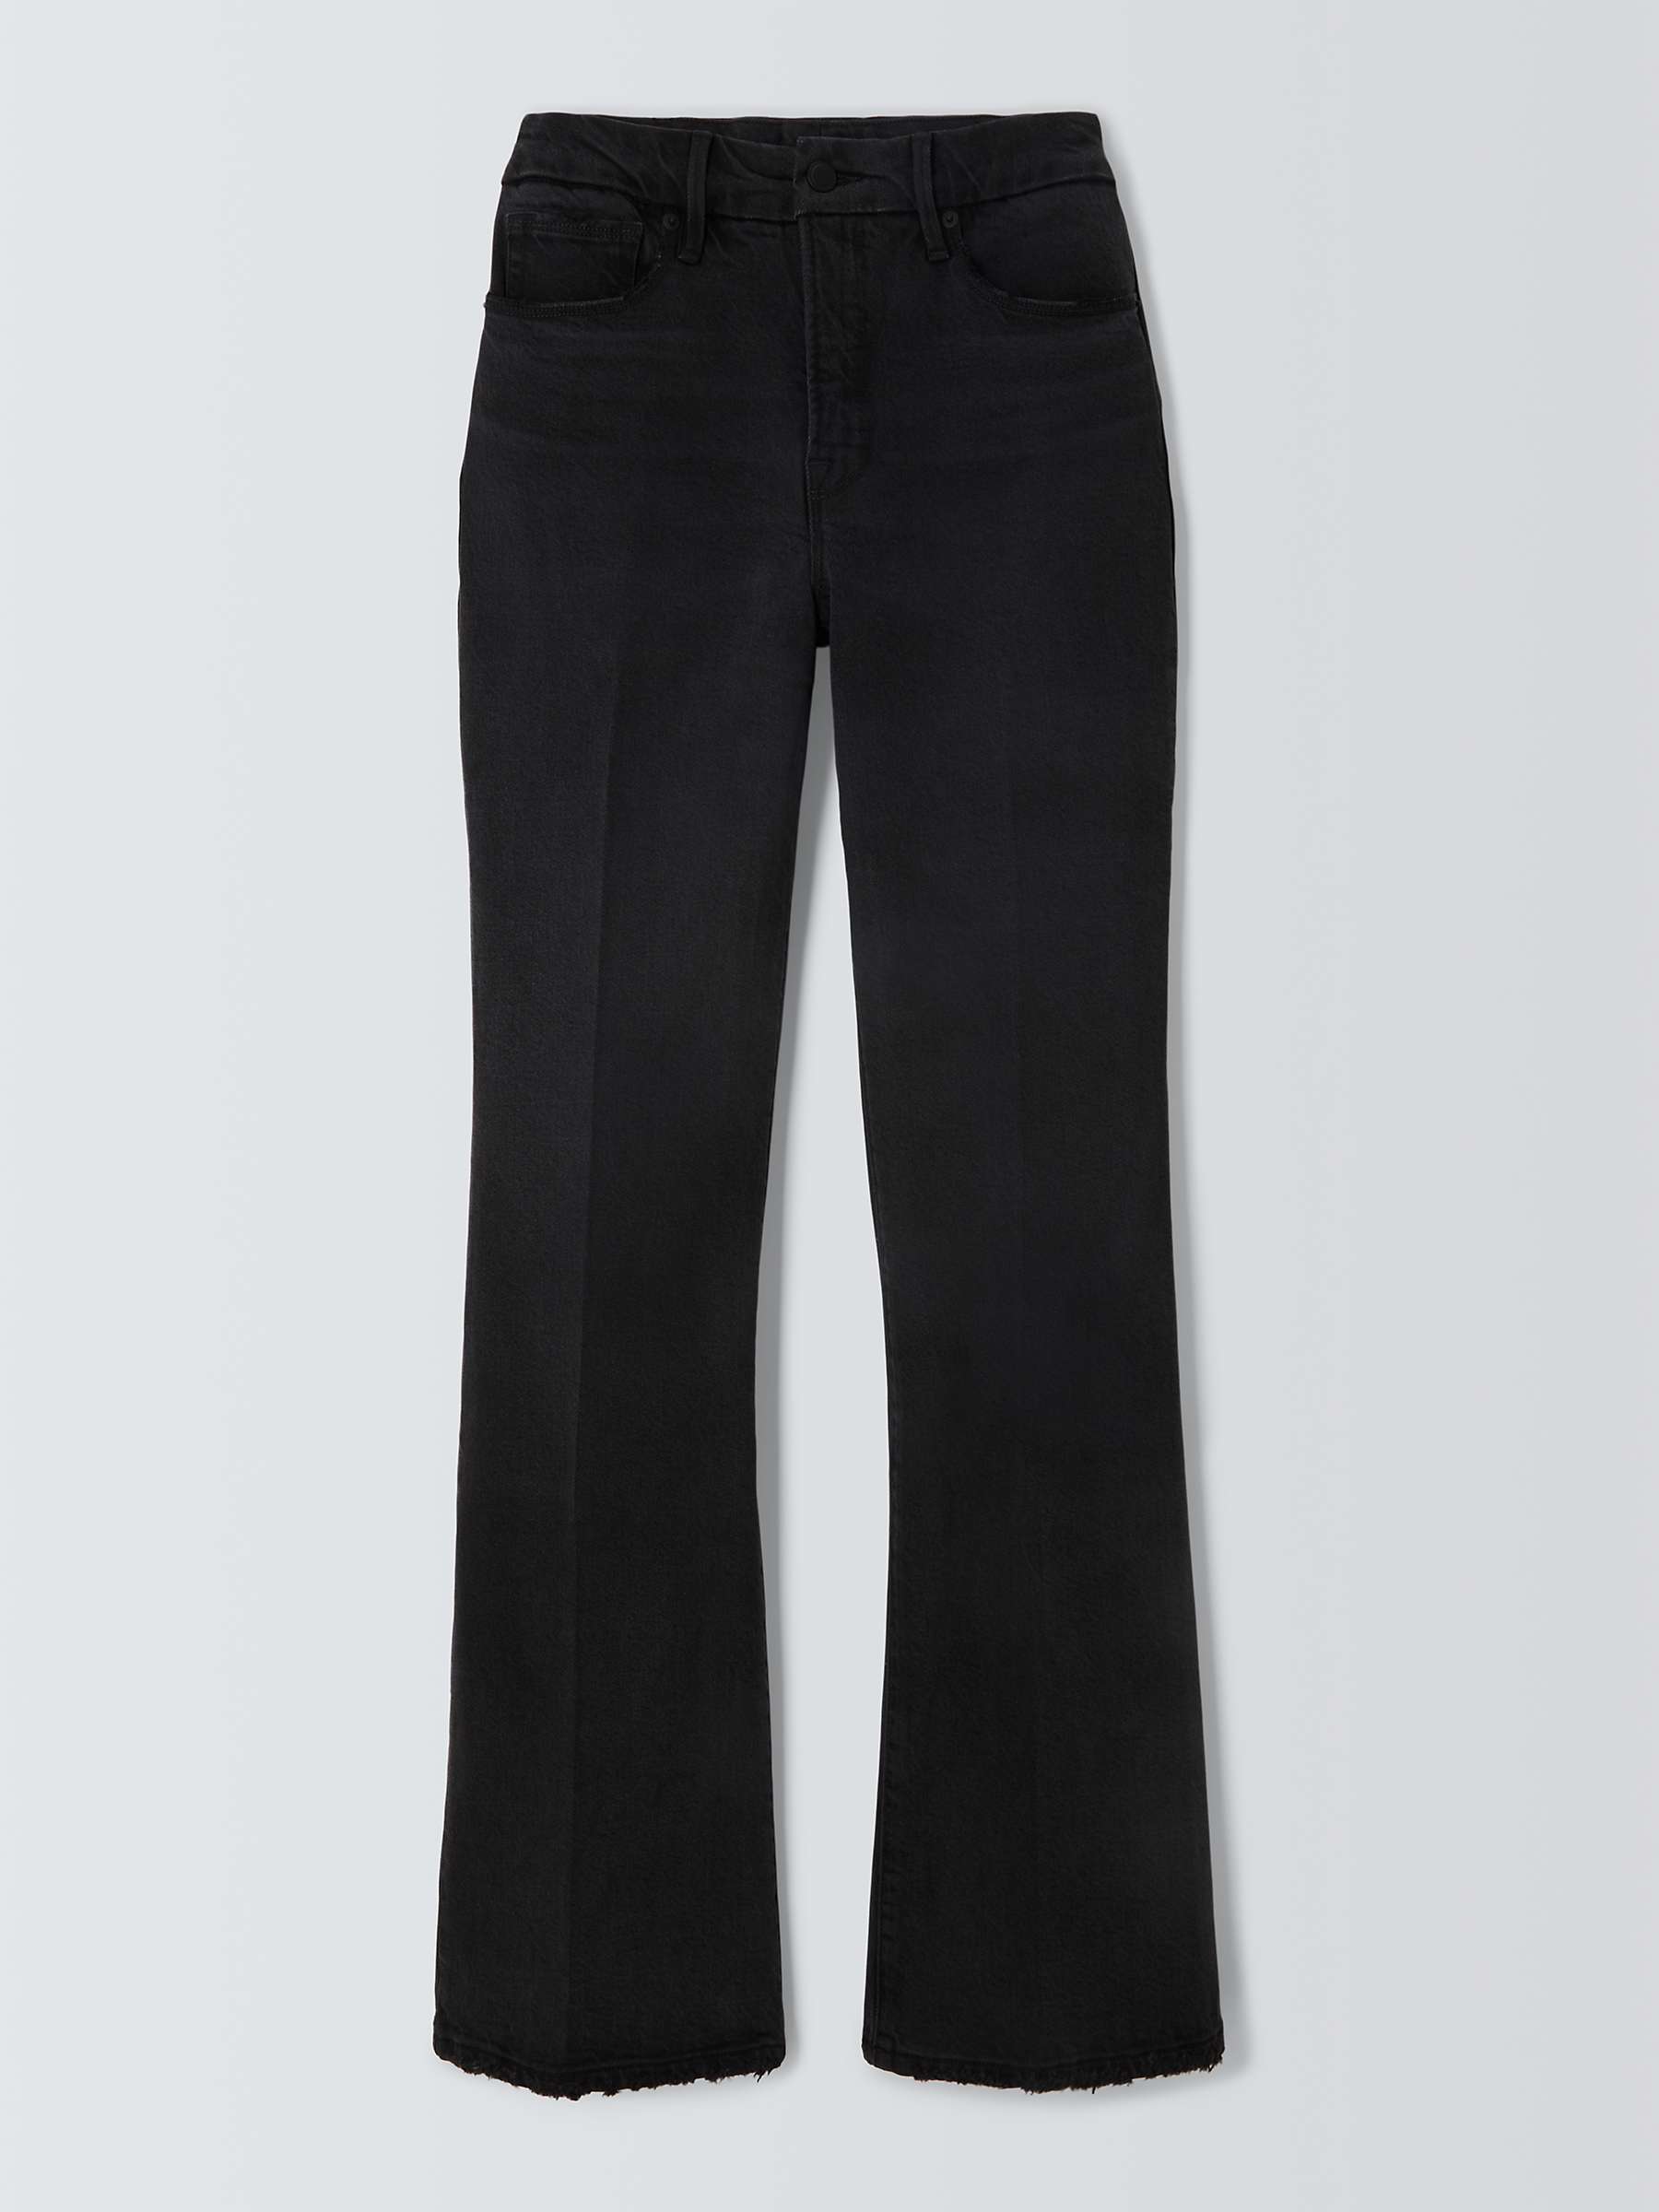 Buy Good American Good Classic Bootcut Jeans, Black Online at johnlewis.com